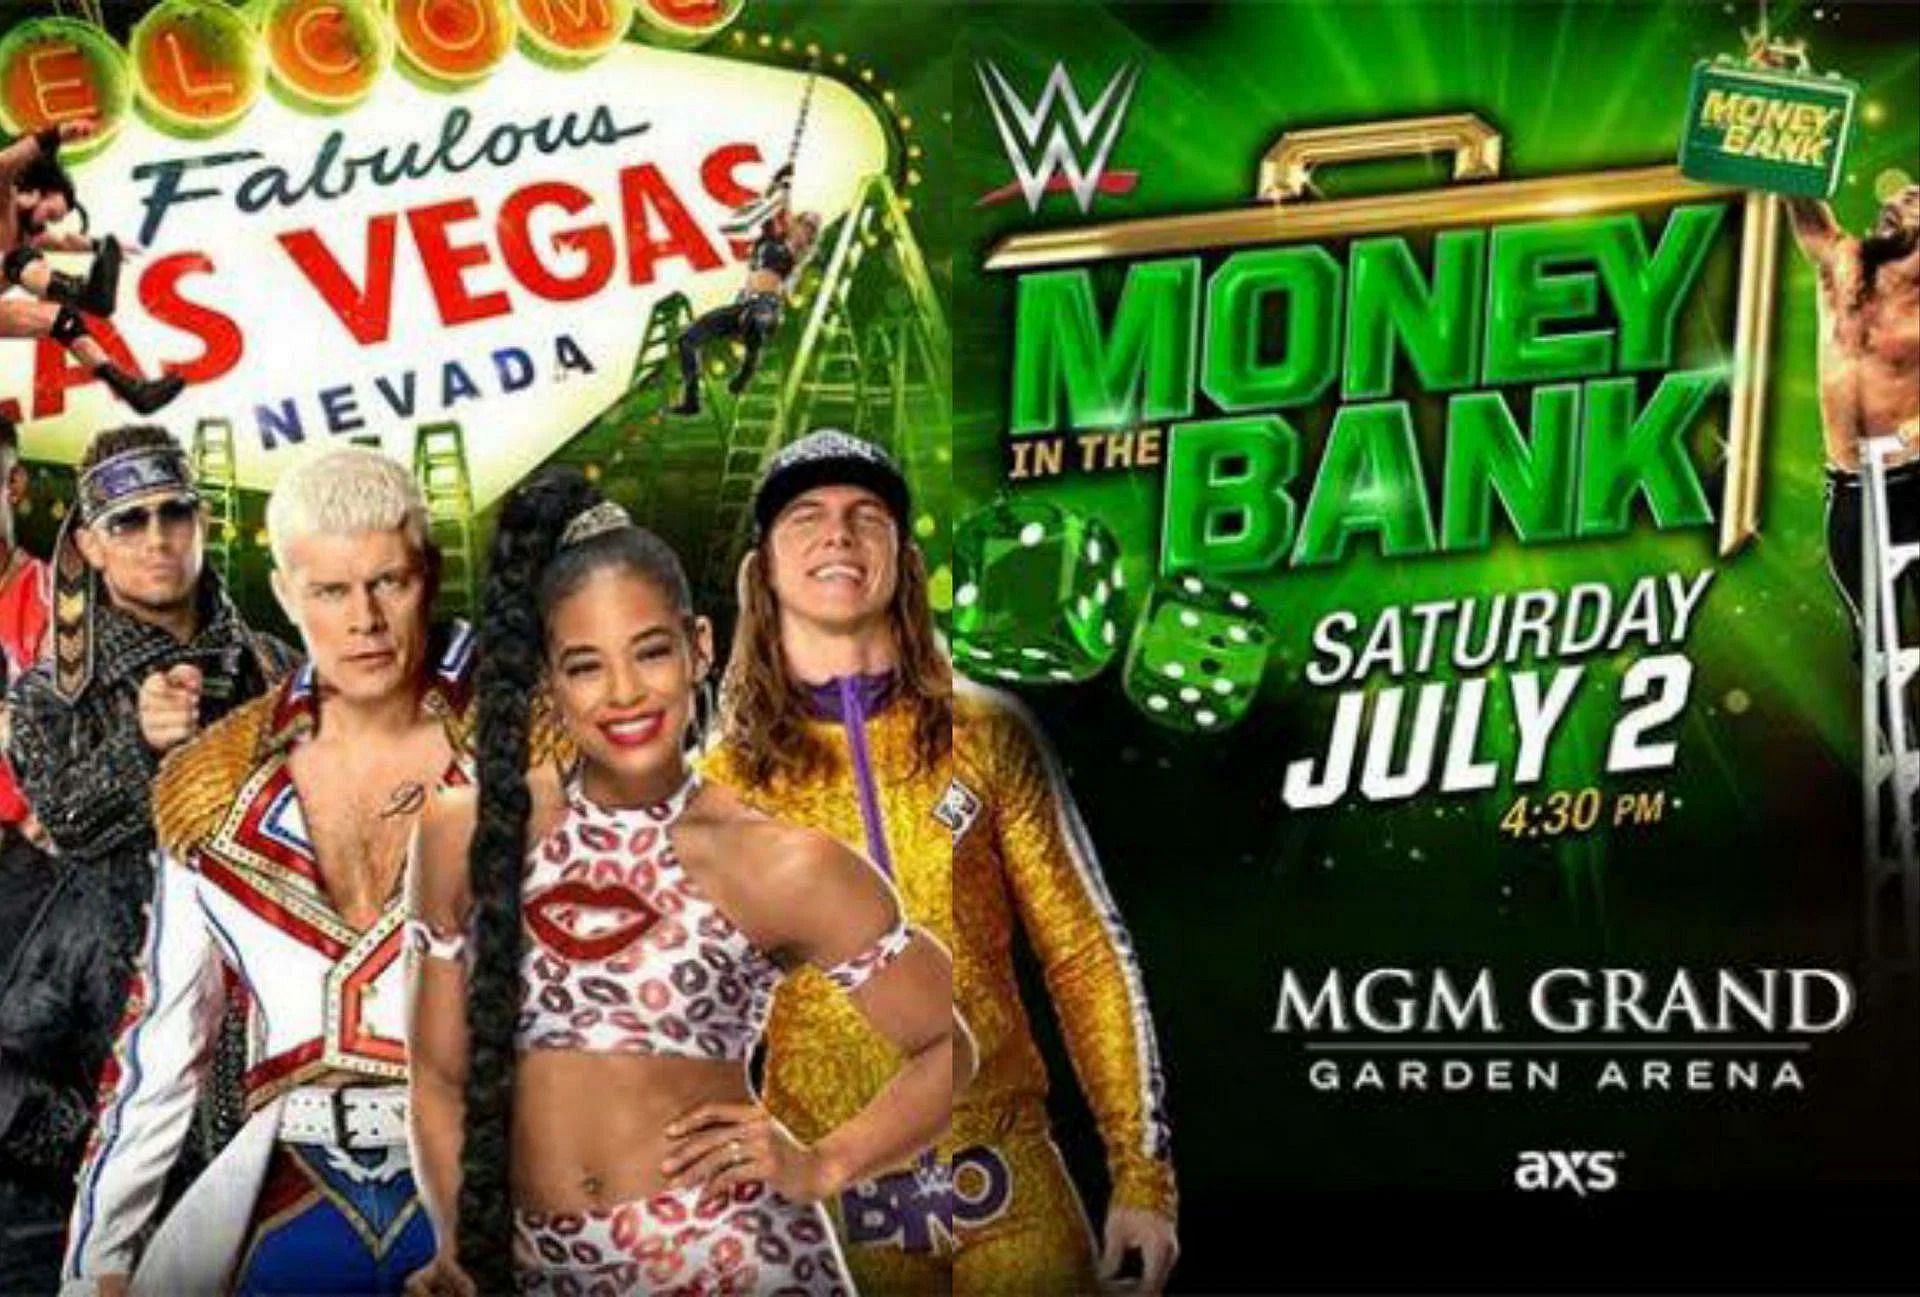 The new poster for MITB shared by WWE last month